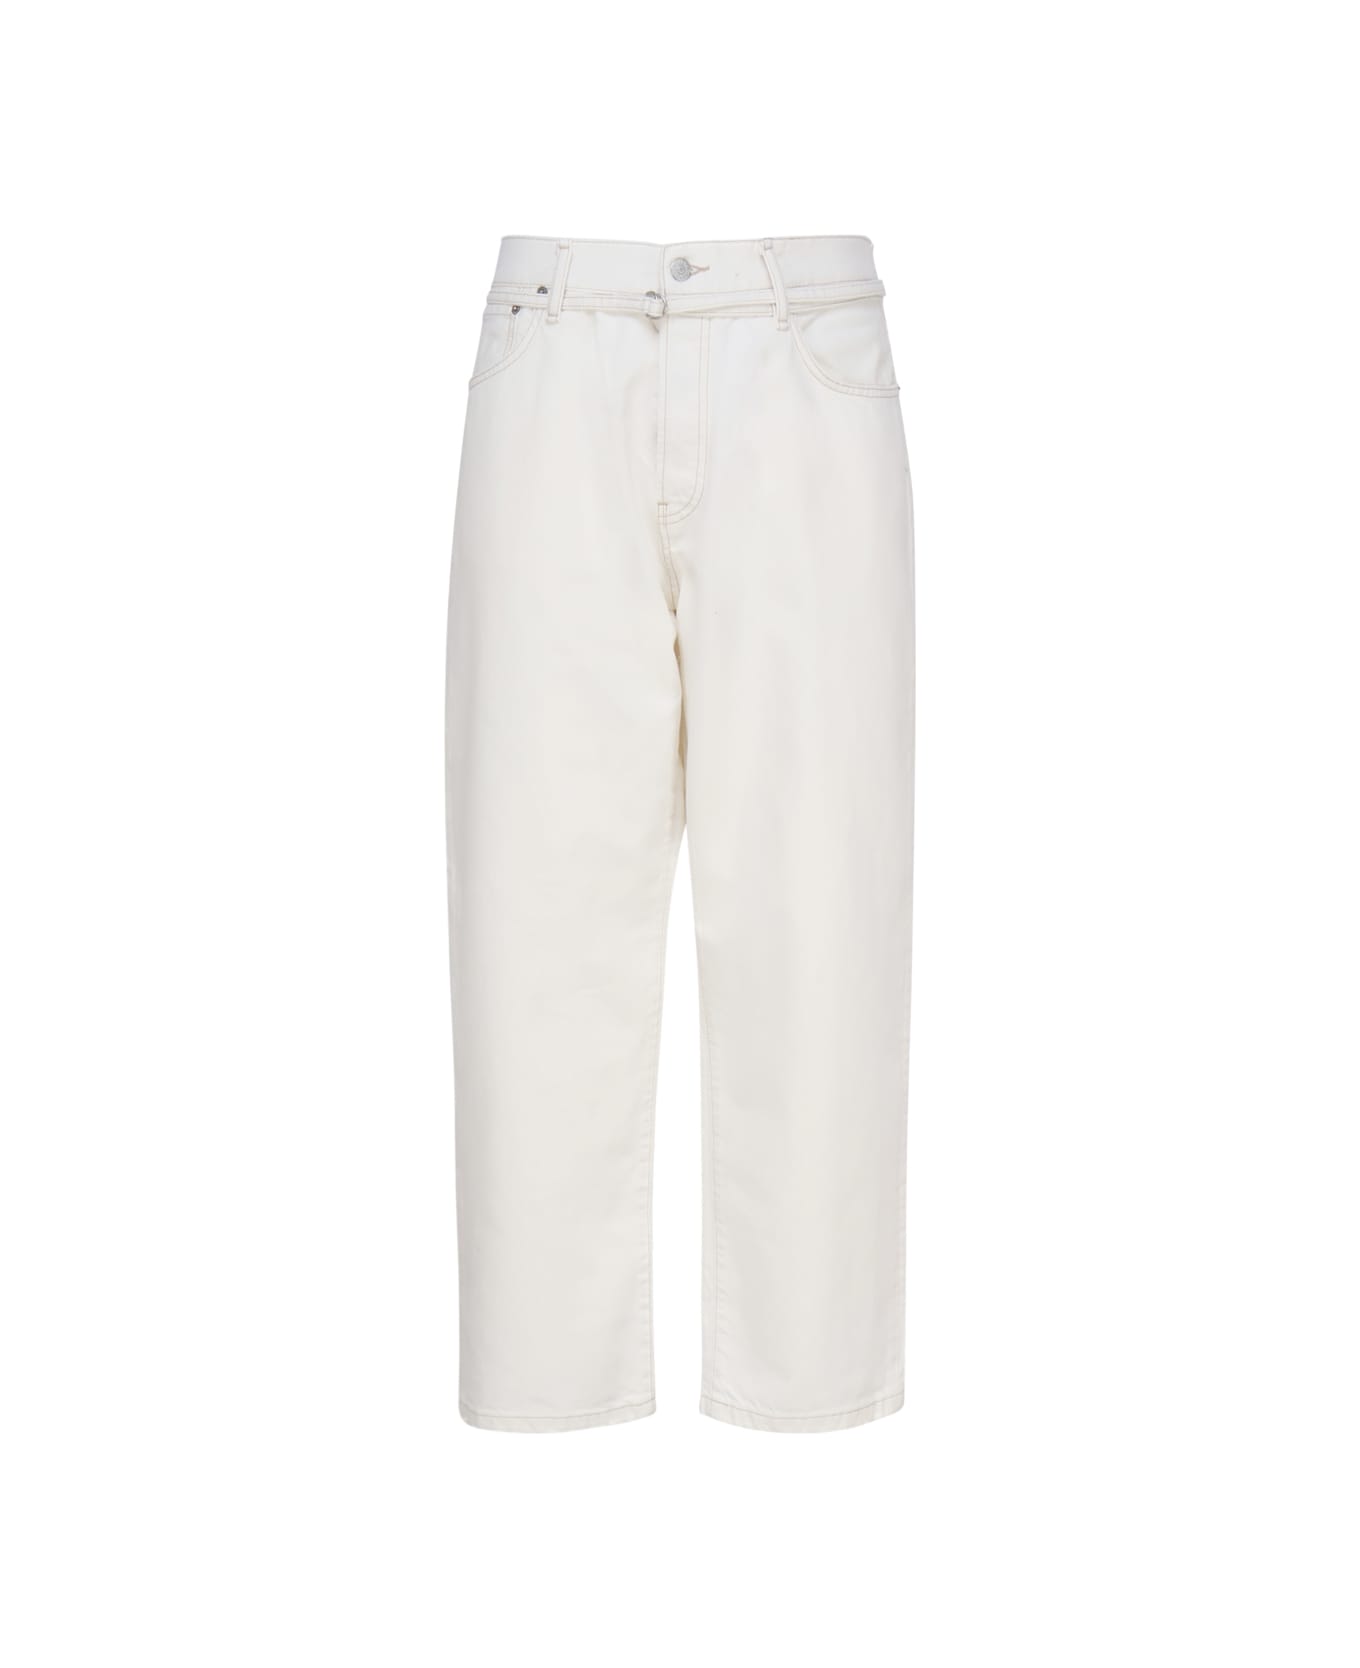 Acne Studios Jeans In Cotton - Off white ボトムス